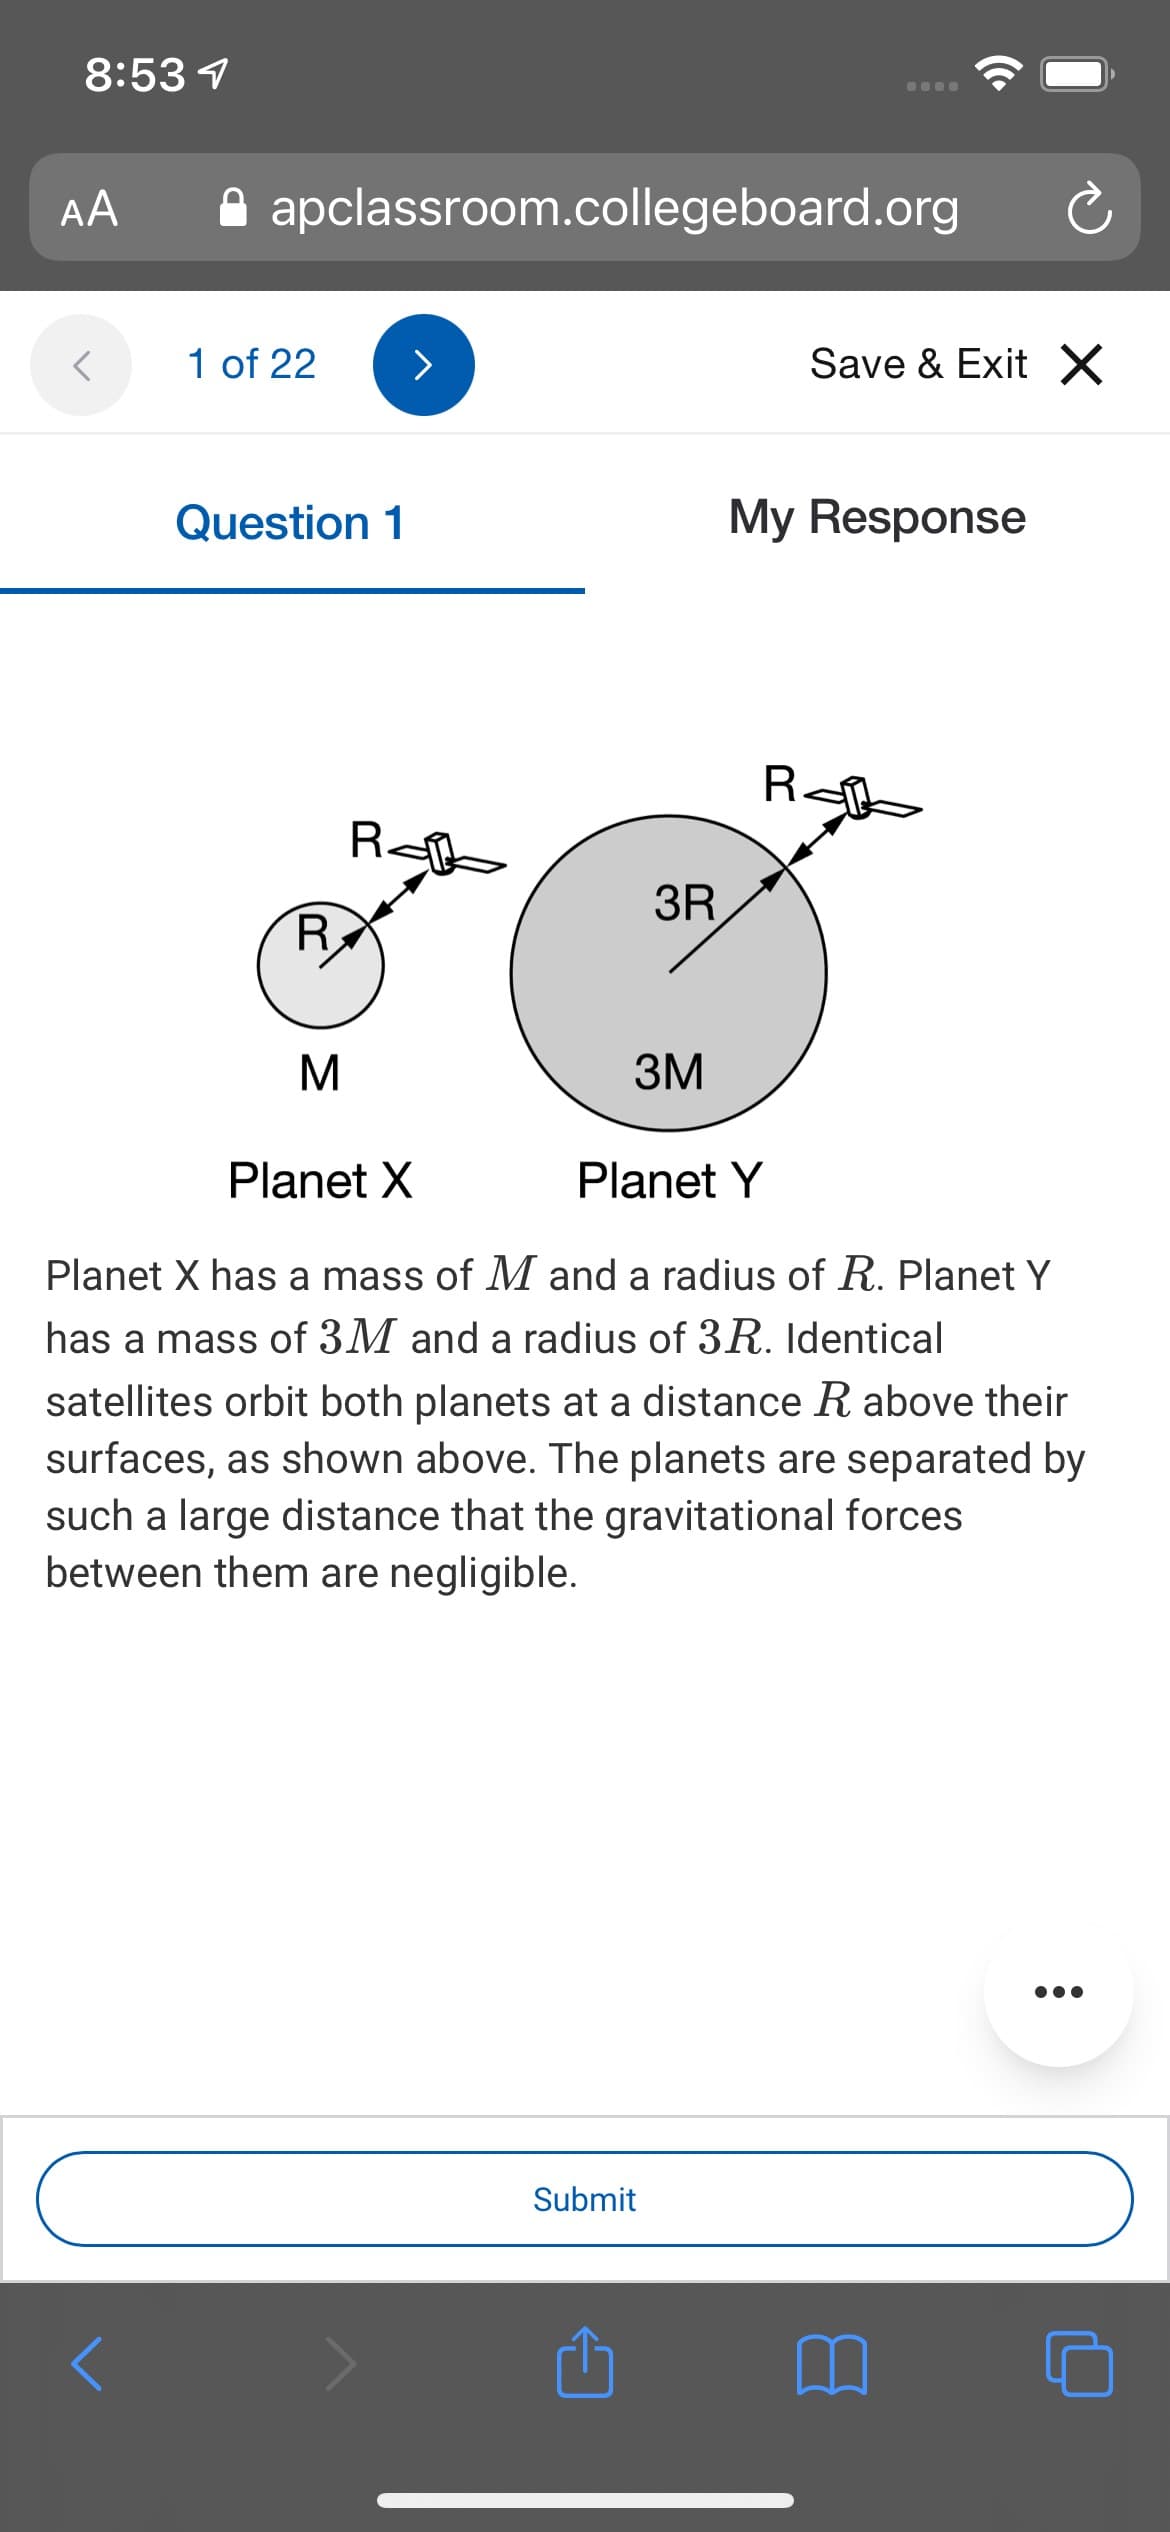 8:53 1
AA
A apclassroom.collegeboard.org
1 of 22
Save & Exit X
Question 1
My Response
R<
R<
3R
R
3M
Planet X
Planet Y
Planet X has a mass of M and a radius of R. Planet Y
has a mass of 3M and a radius of 3R. Identical
satellites orbit both planets at a distance R above their
surfaces, as shown above. The planets are separated by
such a large distance that the gravitational forces
between them are negligible.
Submit
